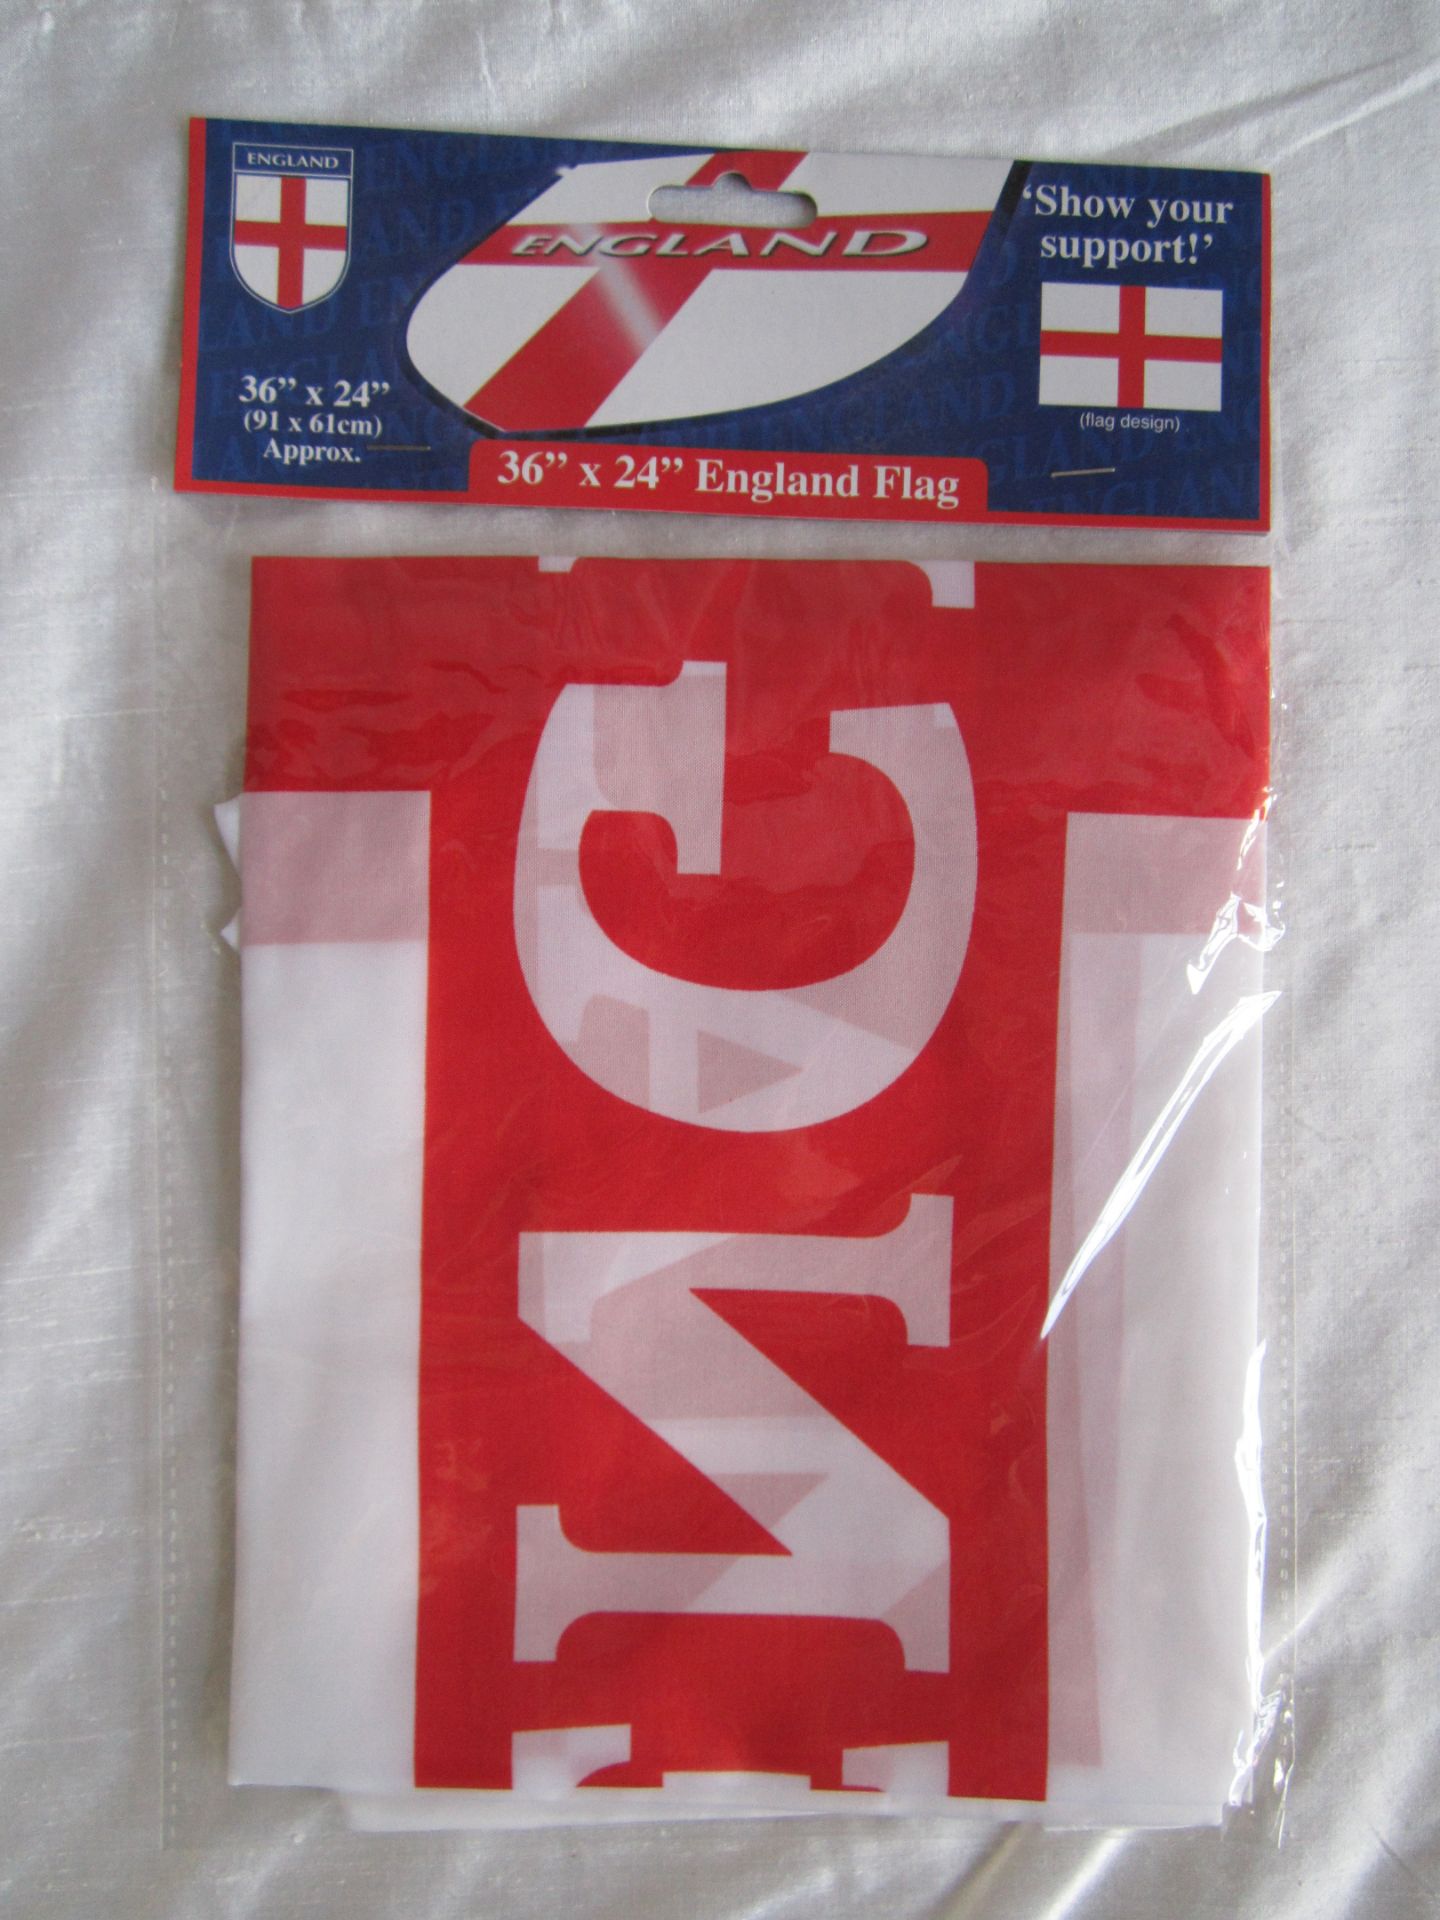 40 Pc Joblot Of England Merchandise/Car Accessories See Description/Delivery Available - Image 3 of 3